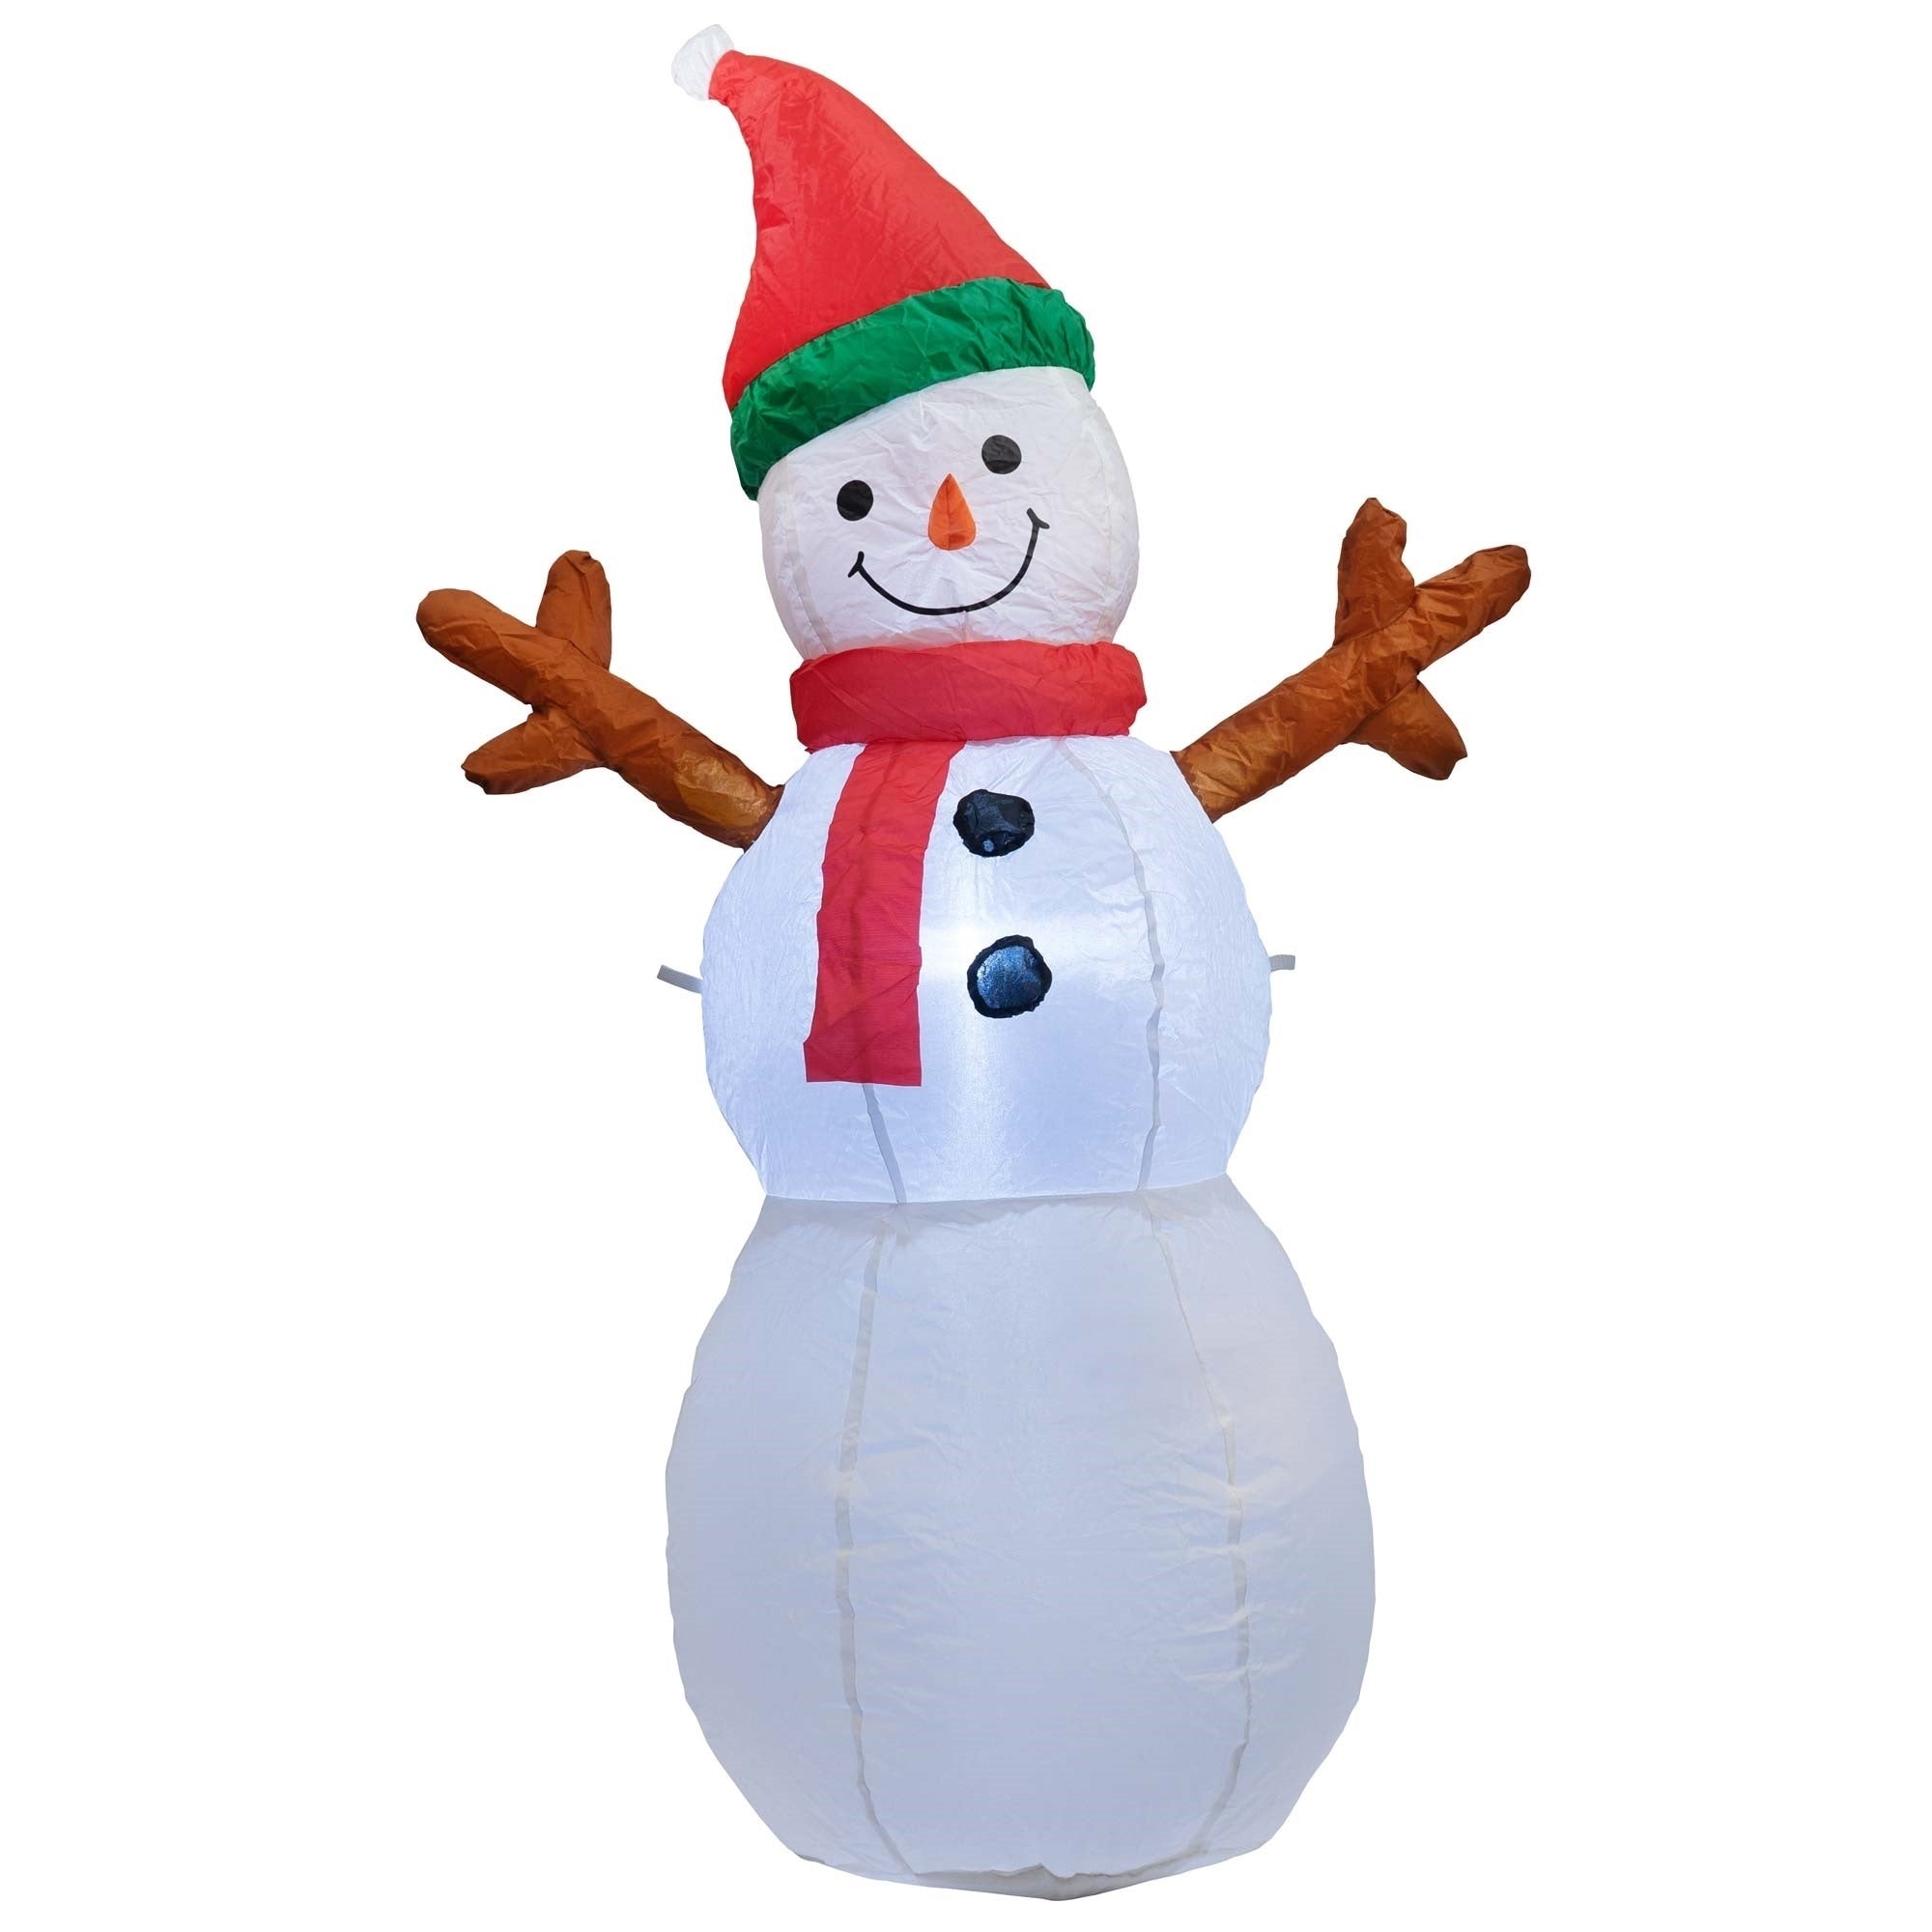 ProductWorks Candy Cane Lane Inflatable Snowman Outdoor Display, 4'